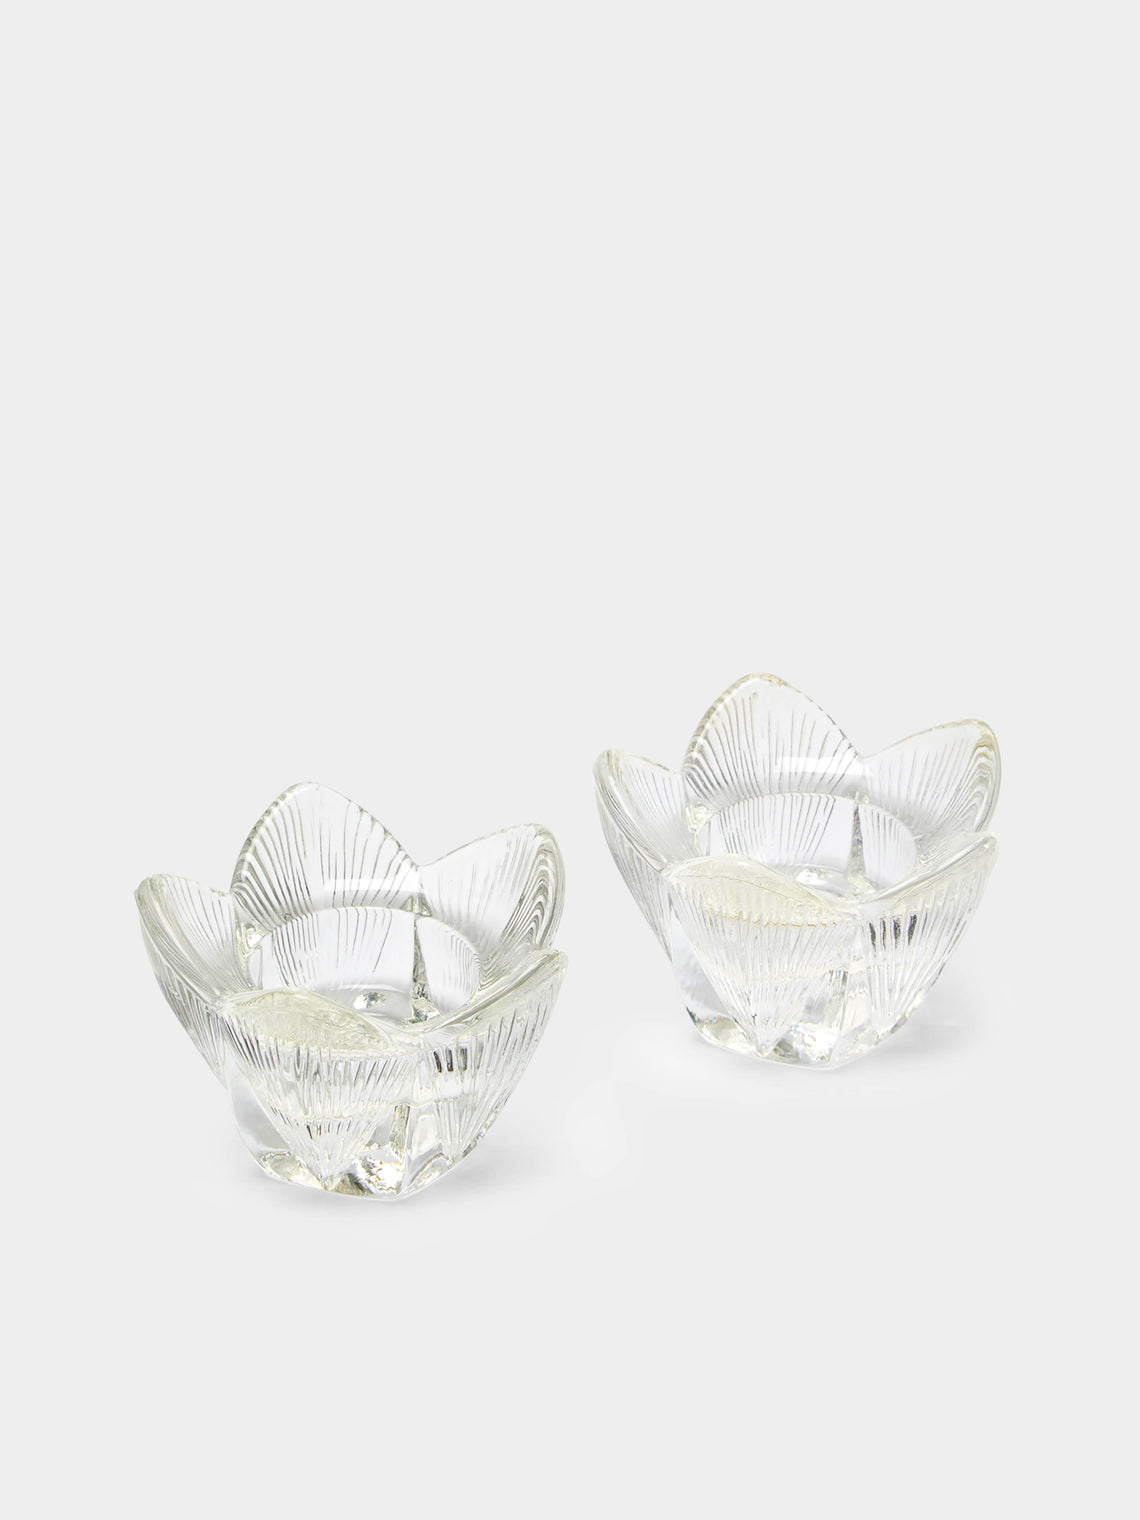 Antique and Vintage - 1930s Daum Flower Crystal Candle Holders (Set of 2) -  - ABASK